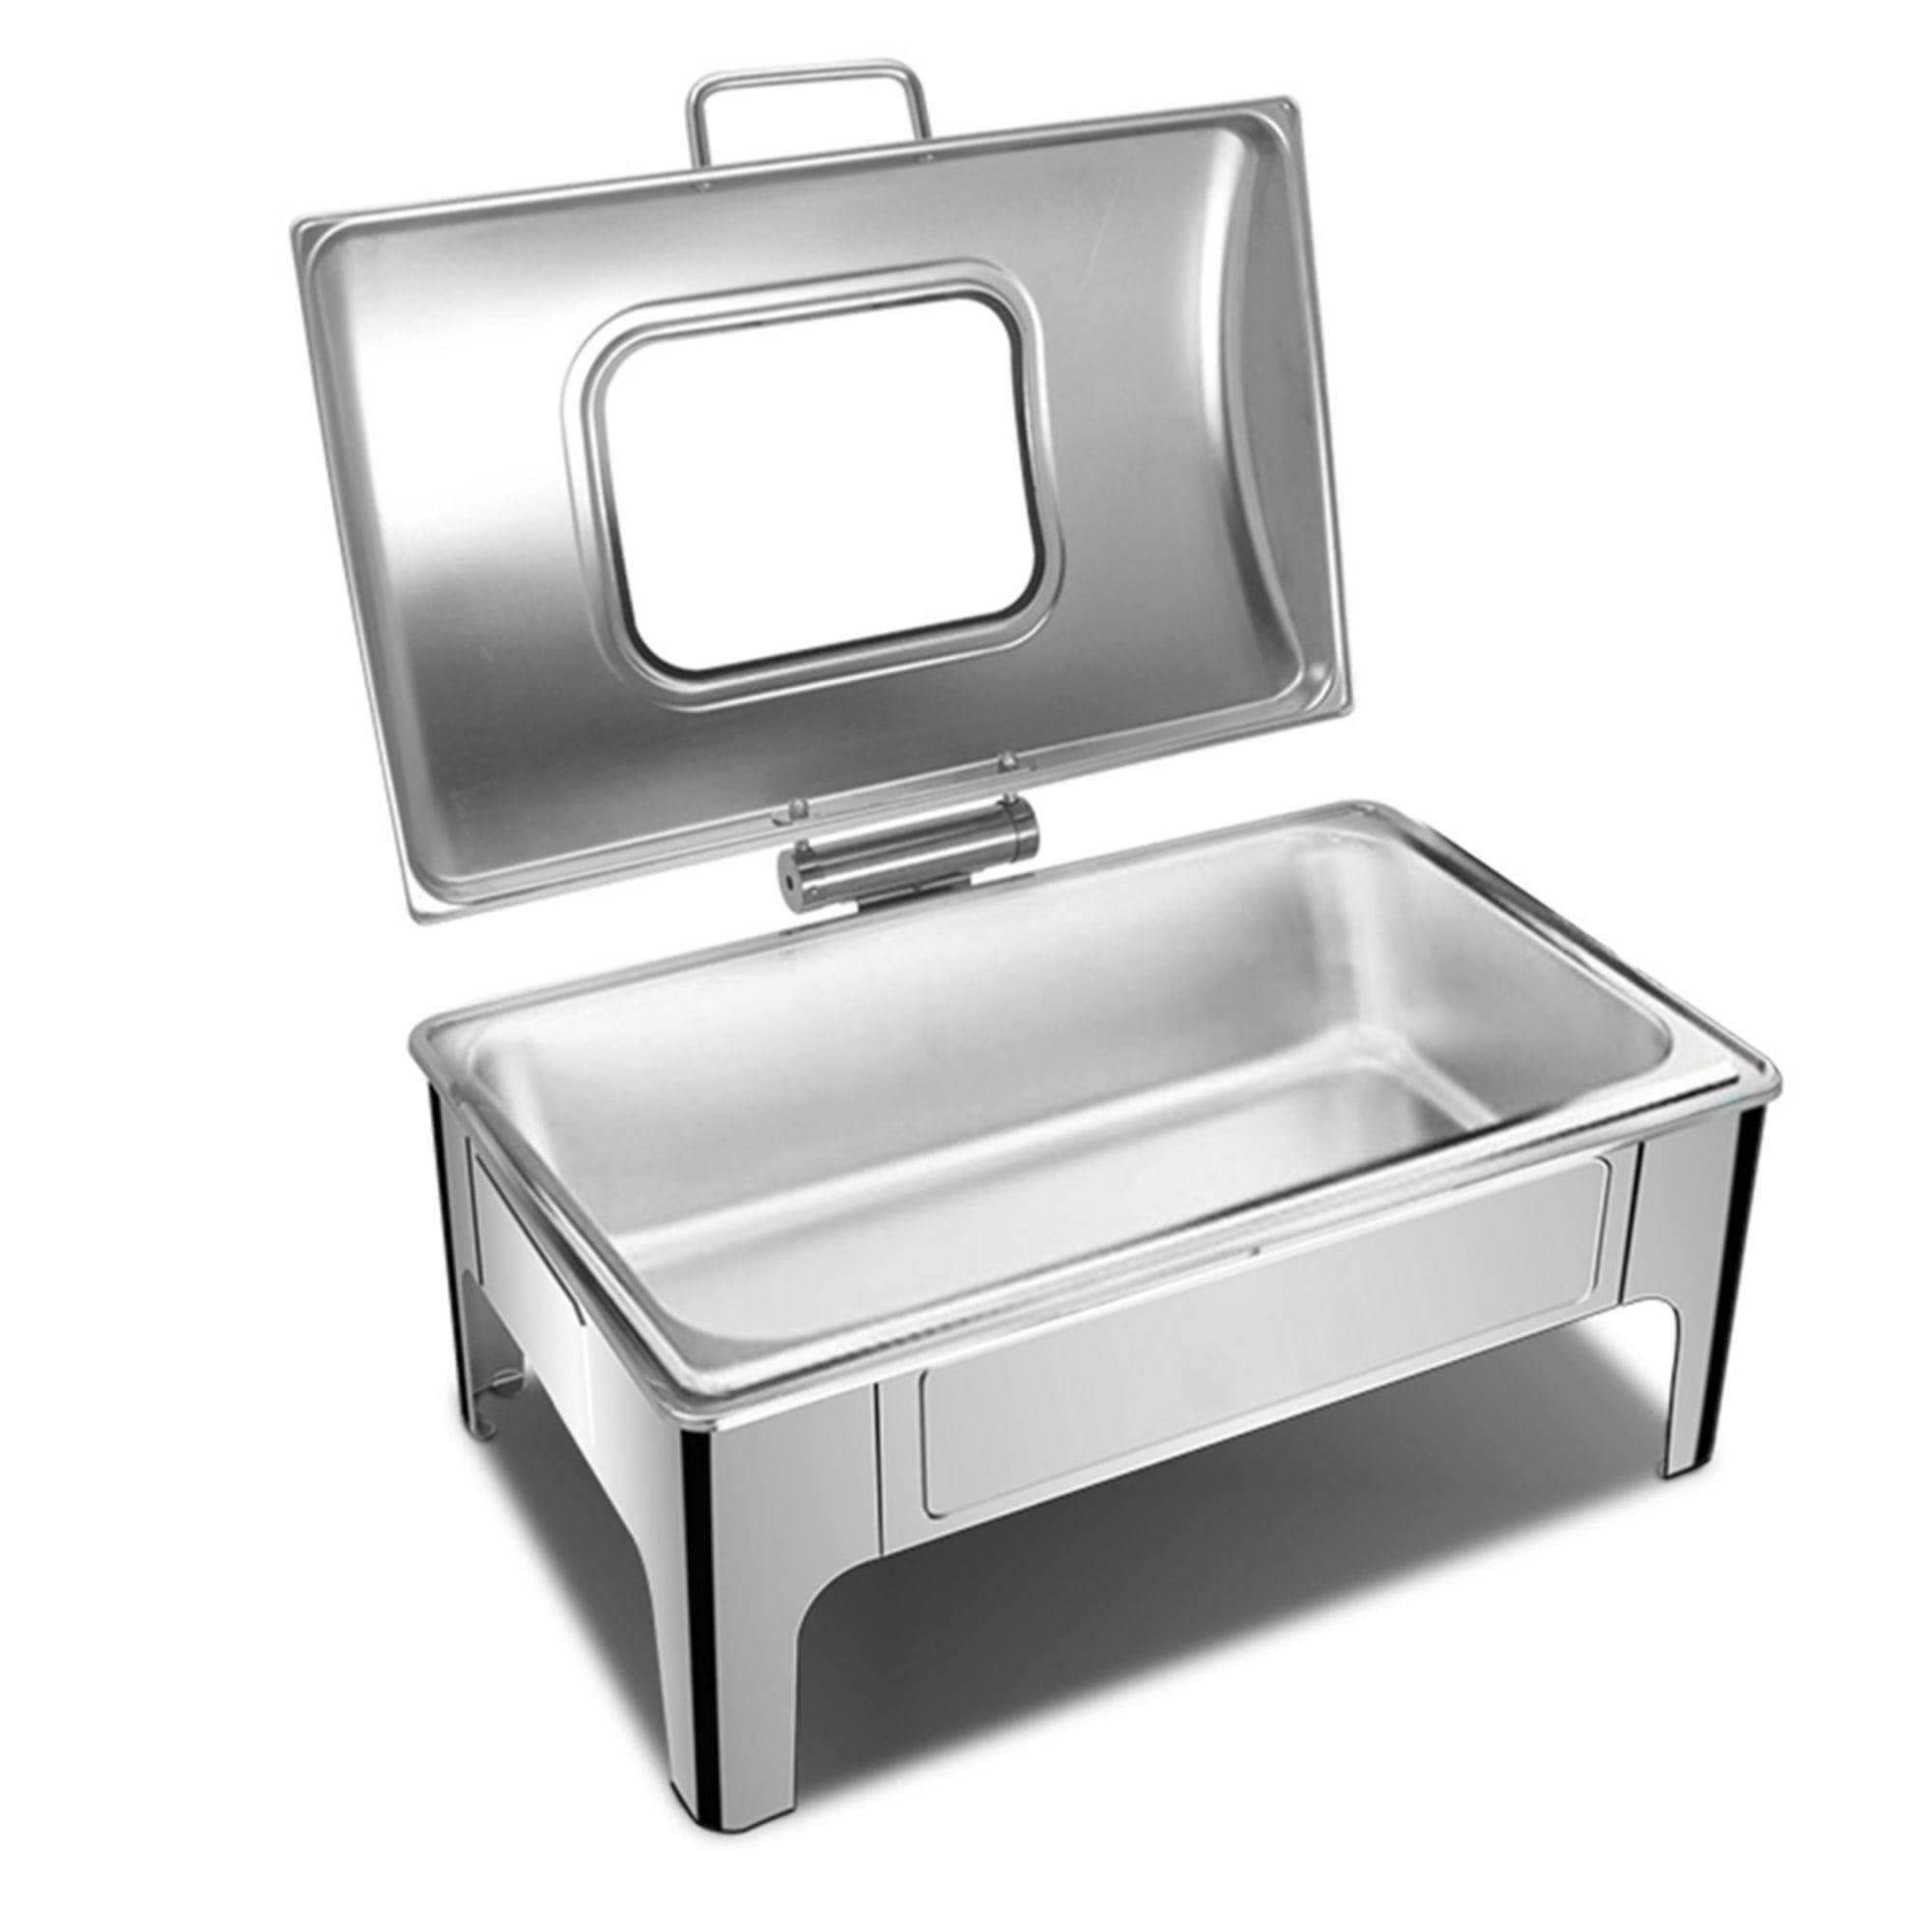 Soga Rectangular Stainless Steel Chafing Dish with Window Lid Set of 2 Image 3